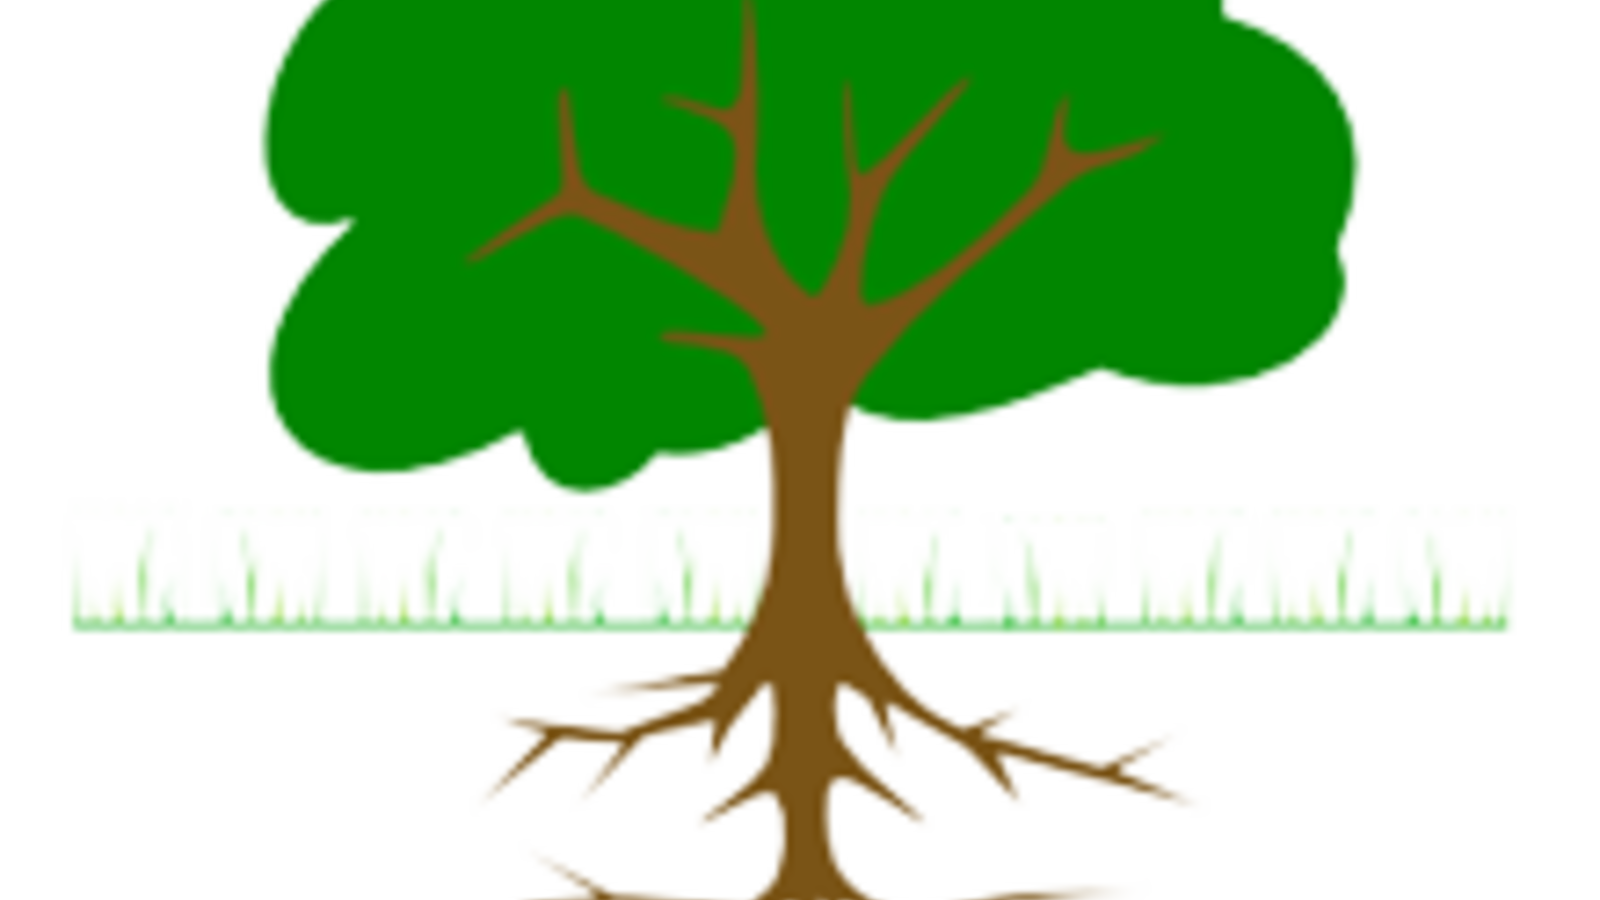 tree_branches_and_roots_02.png